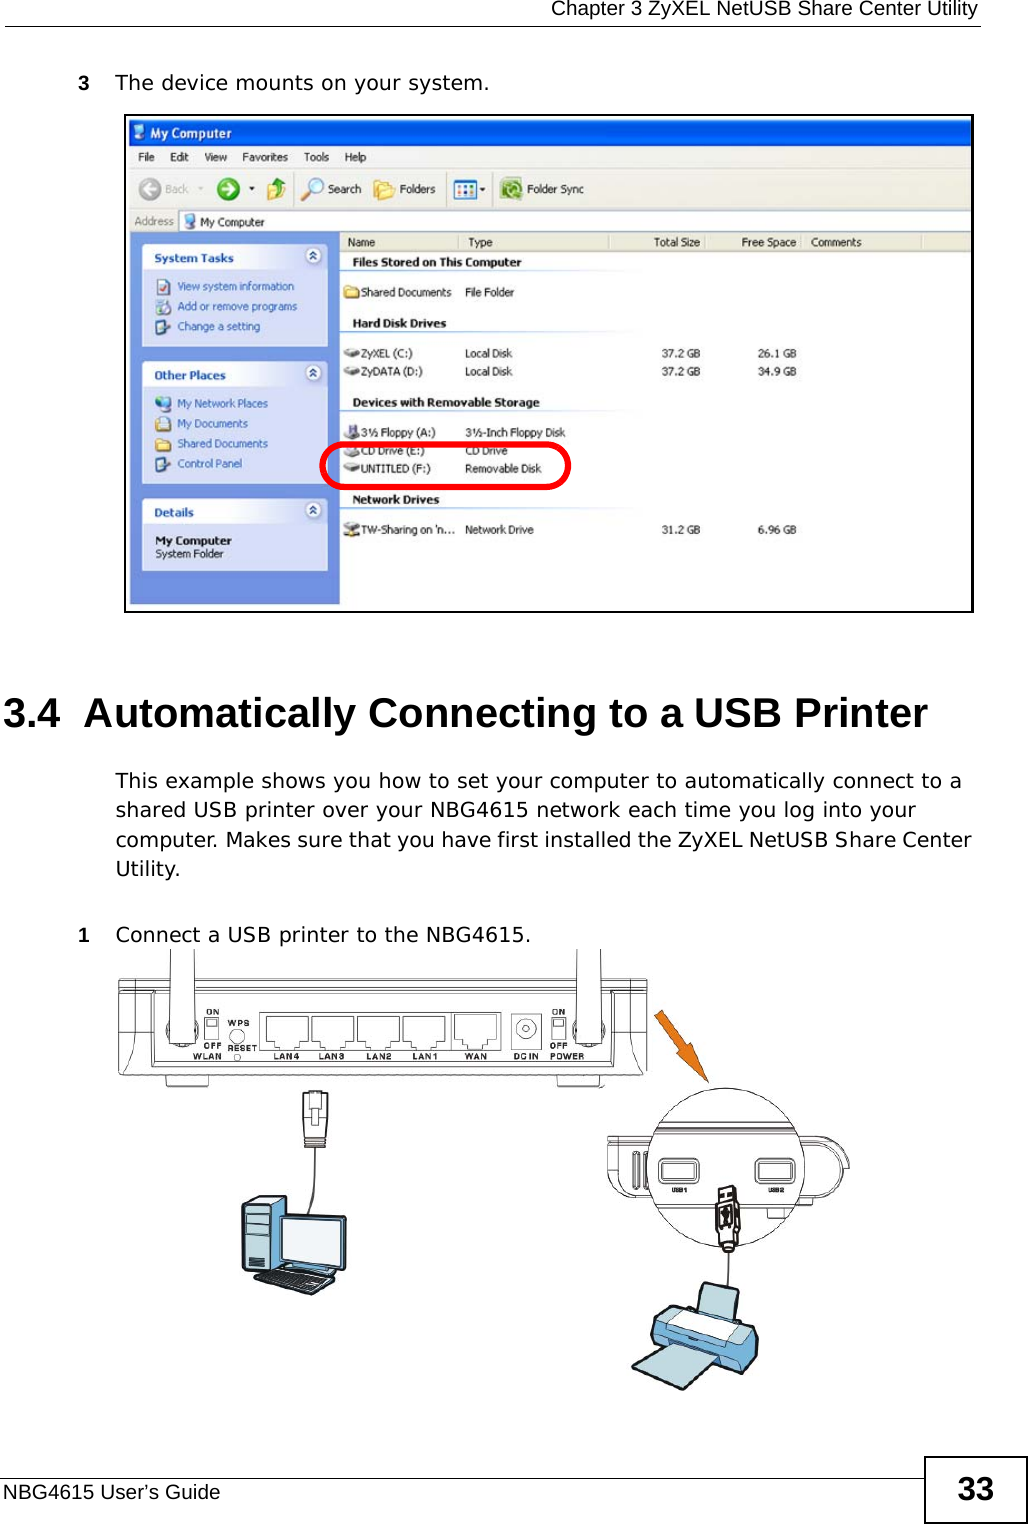  Chapter 3 ZyXEL NetUSB Share Center UtilityNBG4615 User’s Guide 333The device mounts on your system.3.4  Automatically Connecting to a USB PrinterThis example shows you how to set your computer to automatically connect to a shared USB printer over your NBG4615 network each time you log into your computer. Makes sure that you have first installed the ZyXEL NetUSB Share Center Utility.1Connect a USB printer to the NBG4615. 